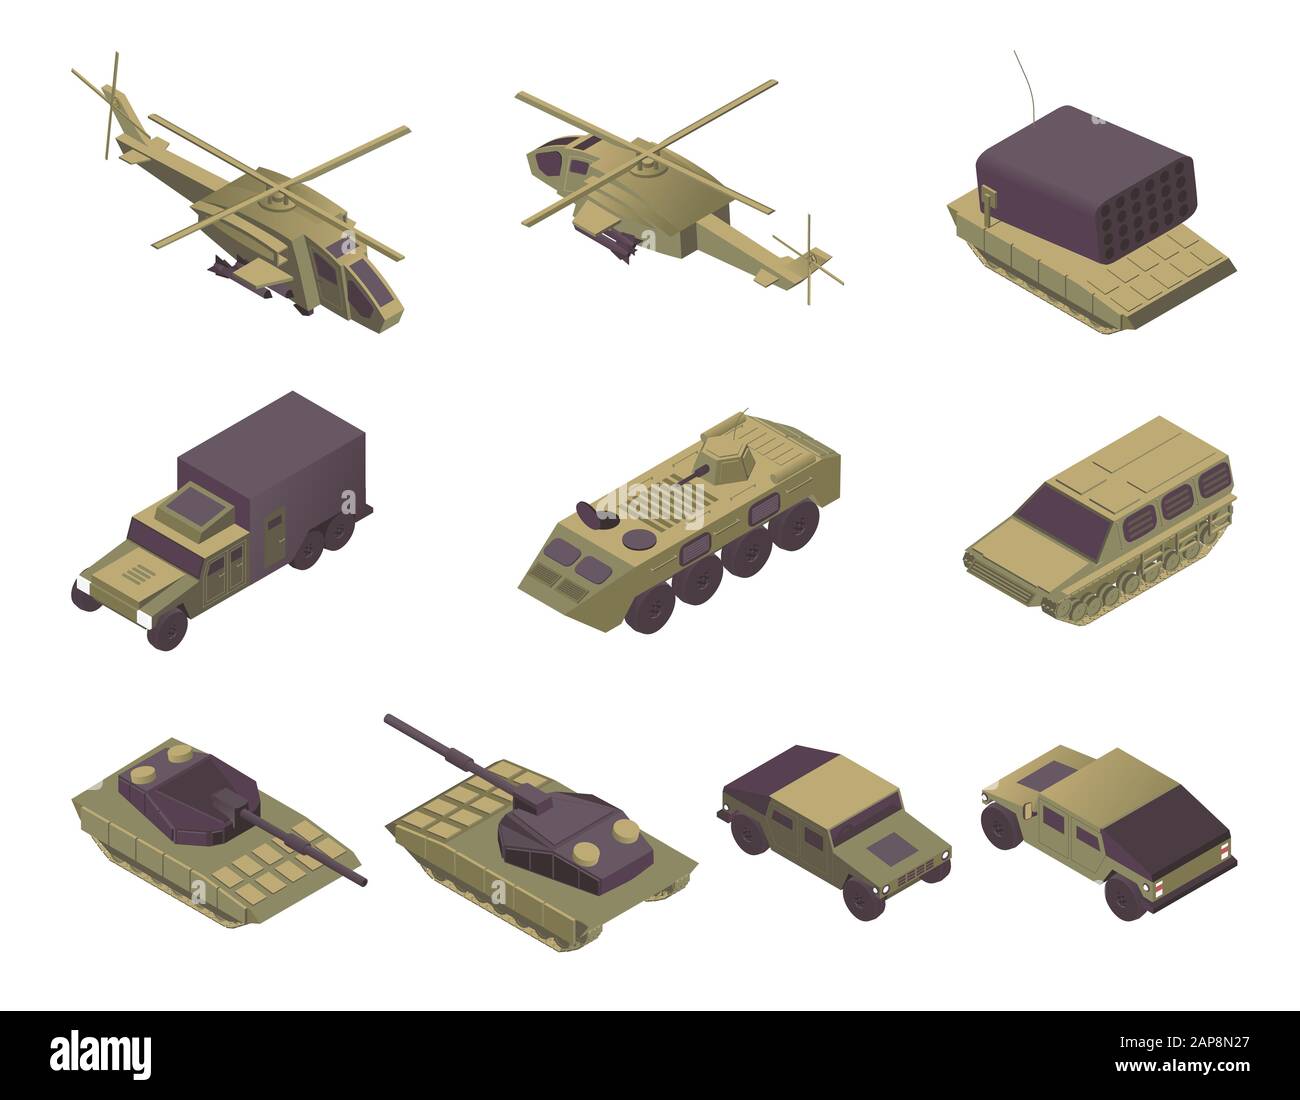 modern armored military vehicles